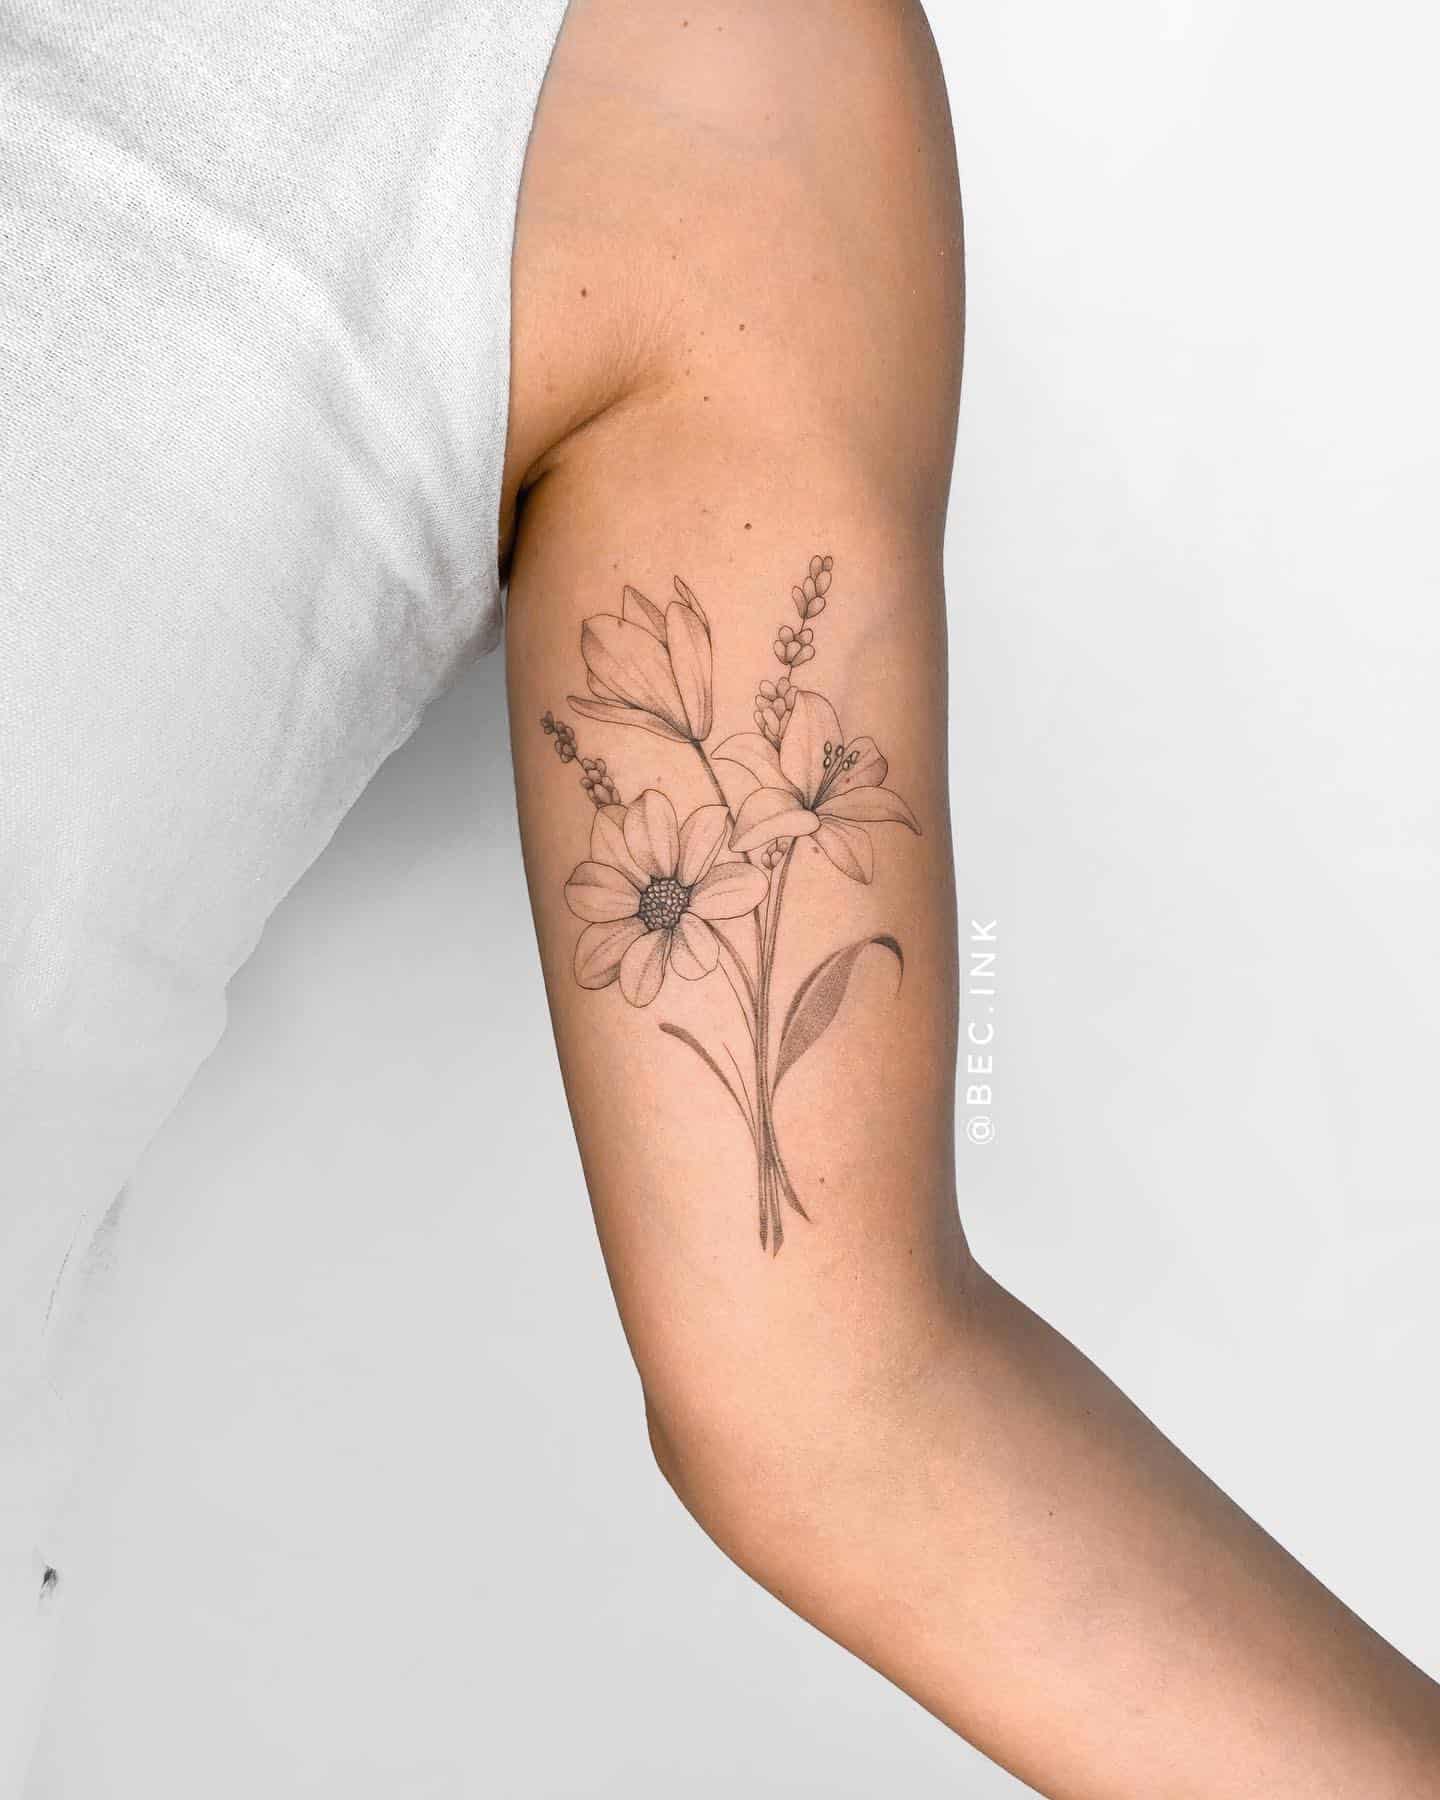 Digital hand drawn line flower tattoo design small size Floral tattoo design  Digital file Instant download Drawing  Illustration Art  Collectibles  eolaneee